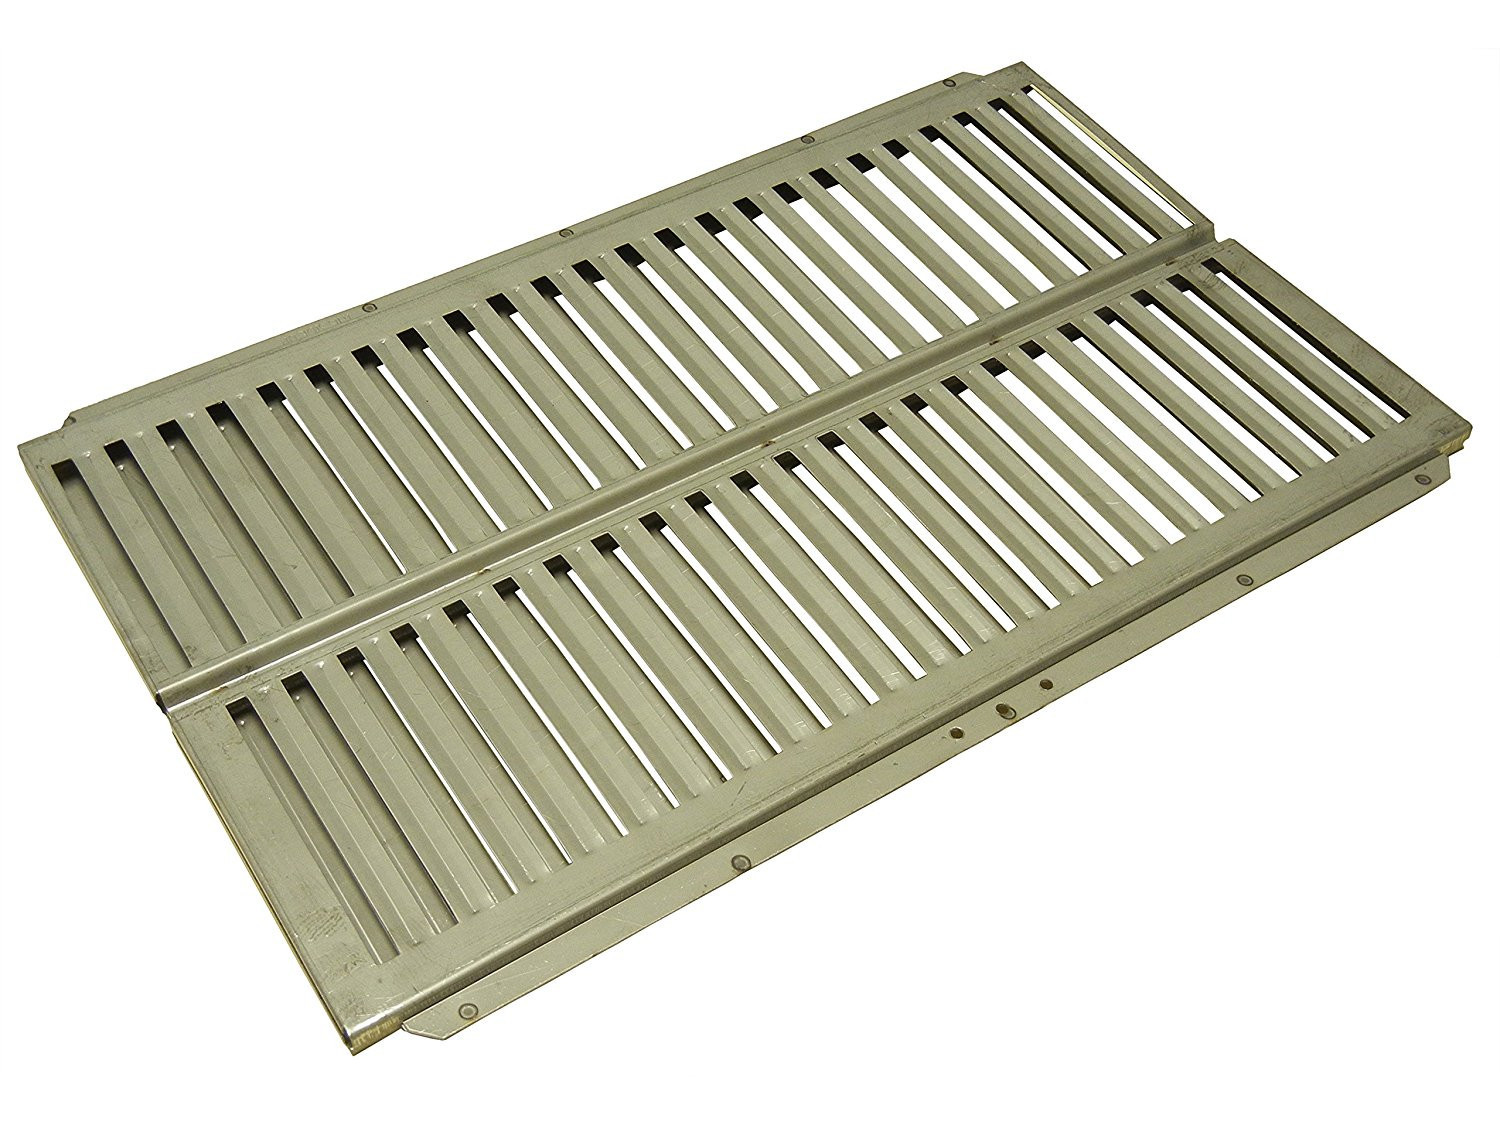 Stainless steel heat plate for Ducane brand gas grills